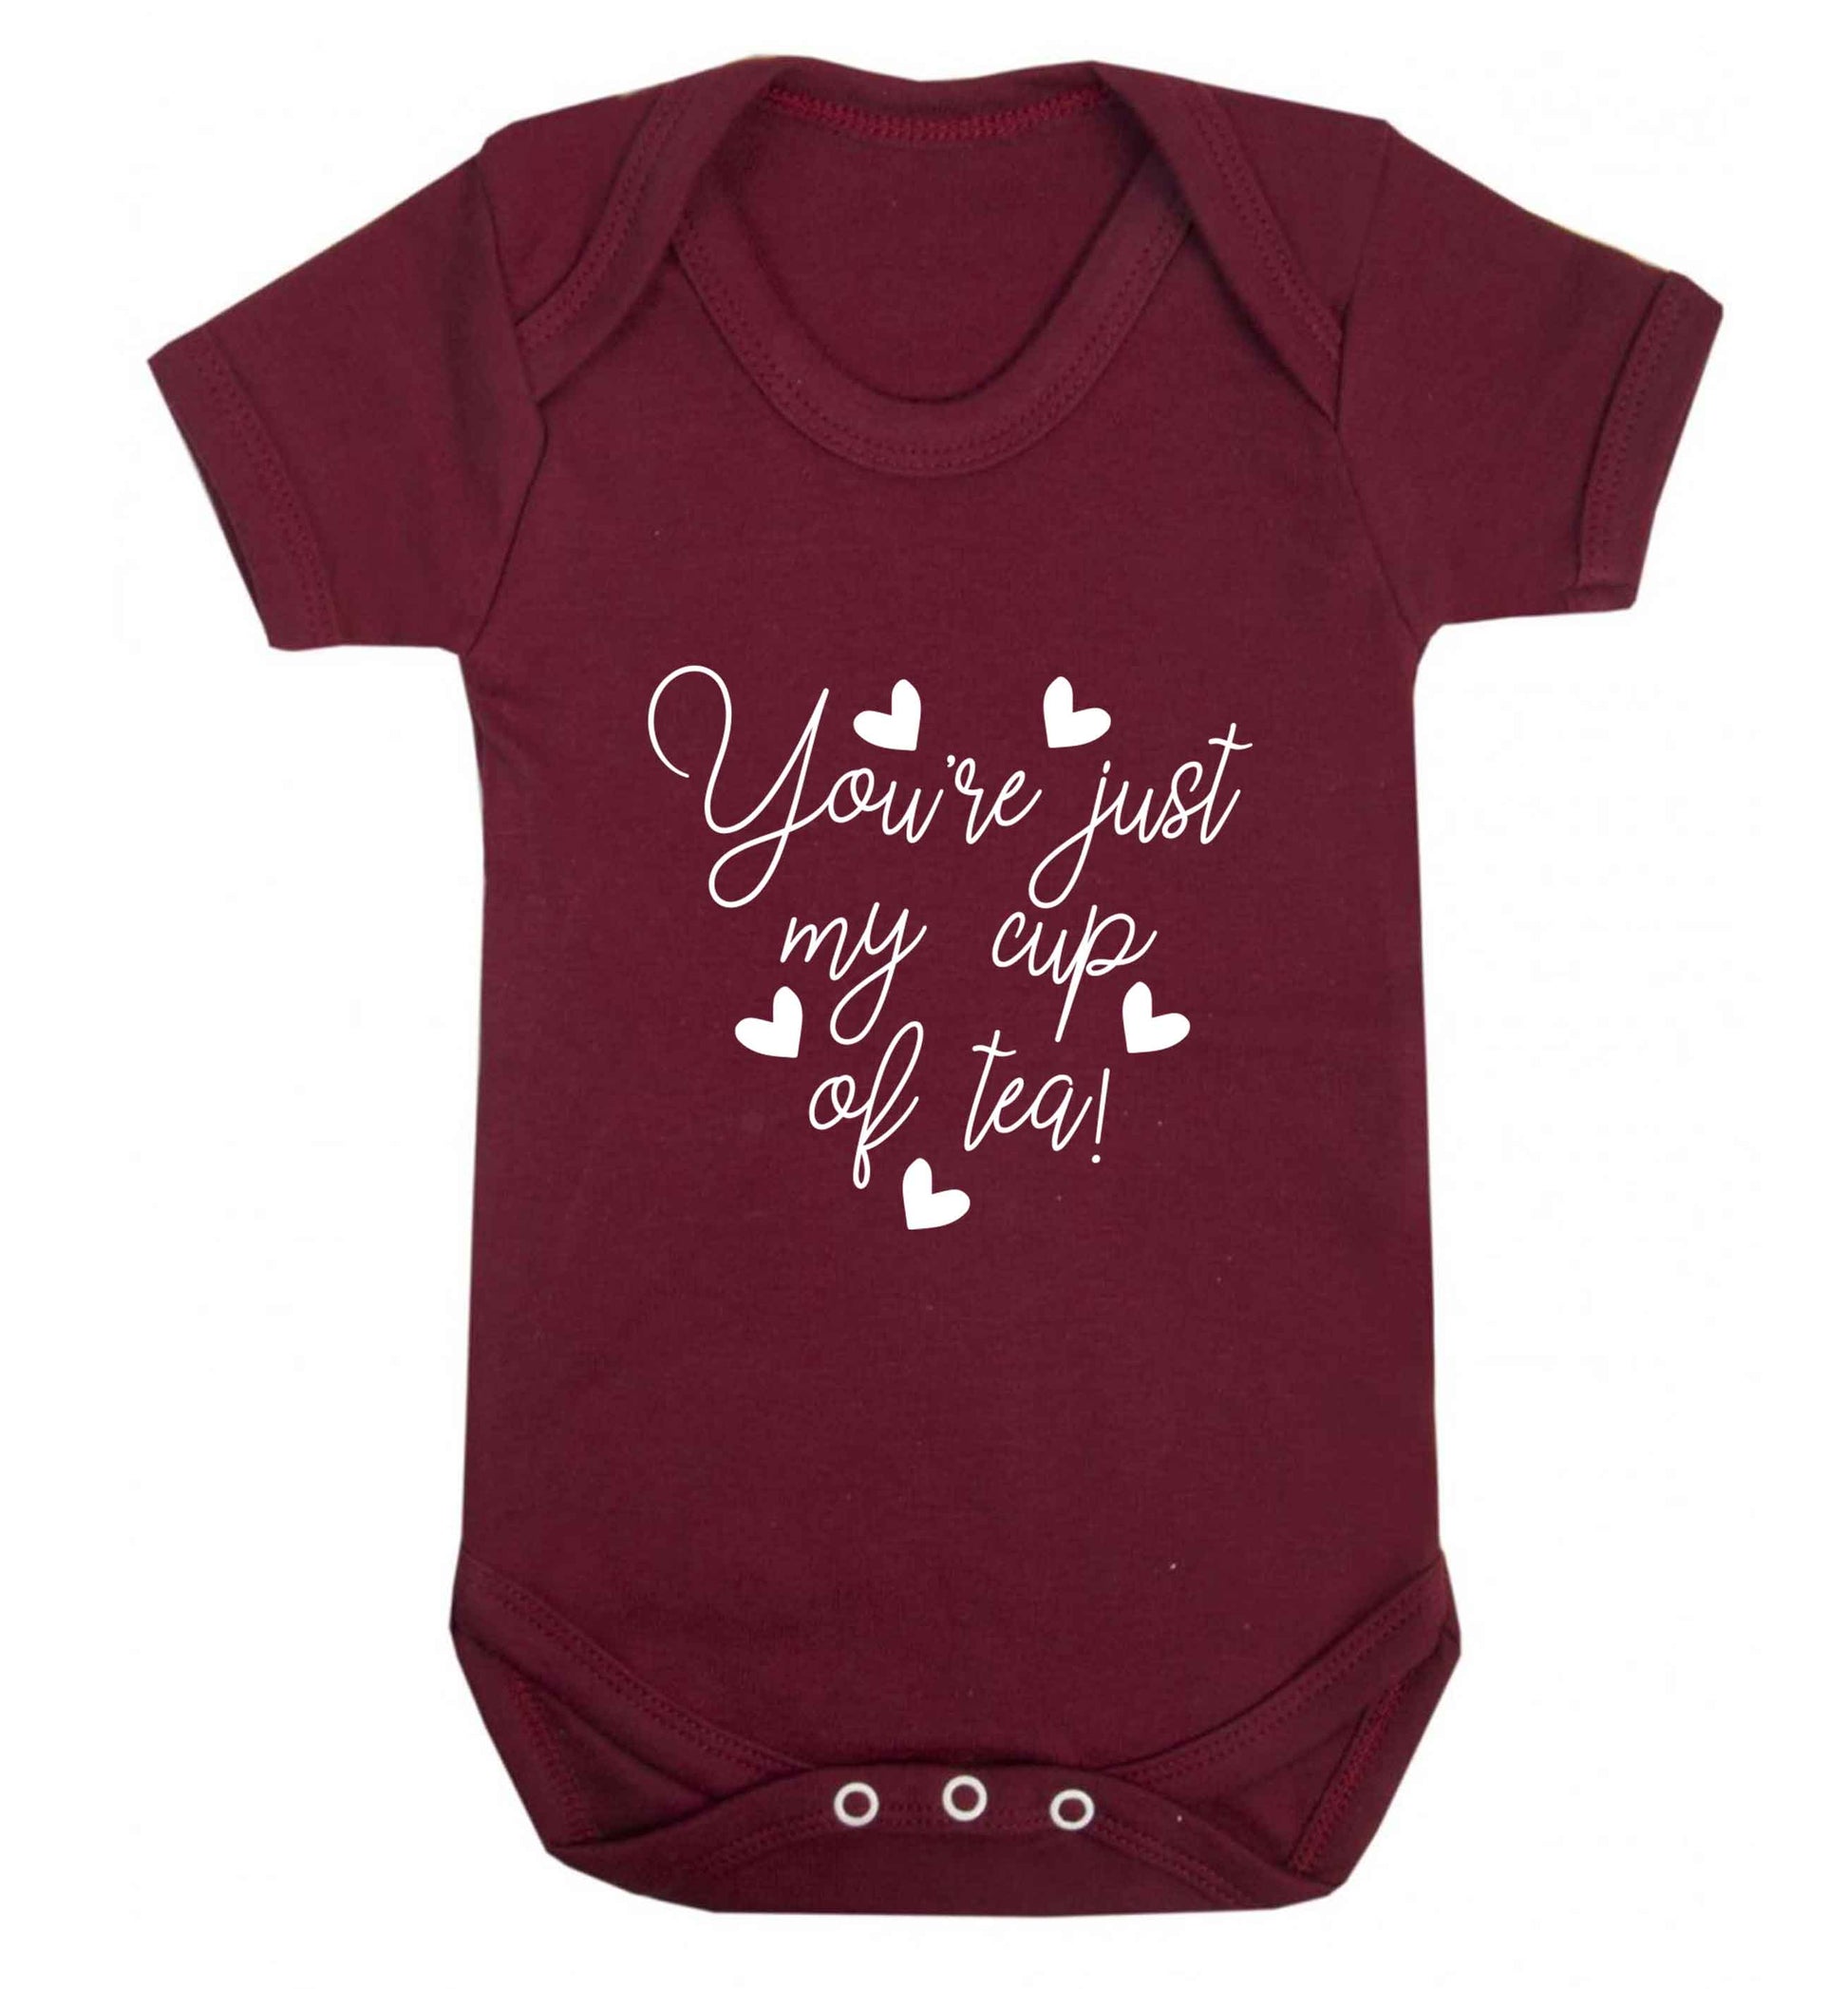 You're just my cup of tea baby vest maroon 18-24 months